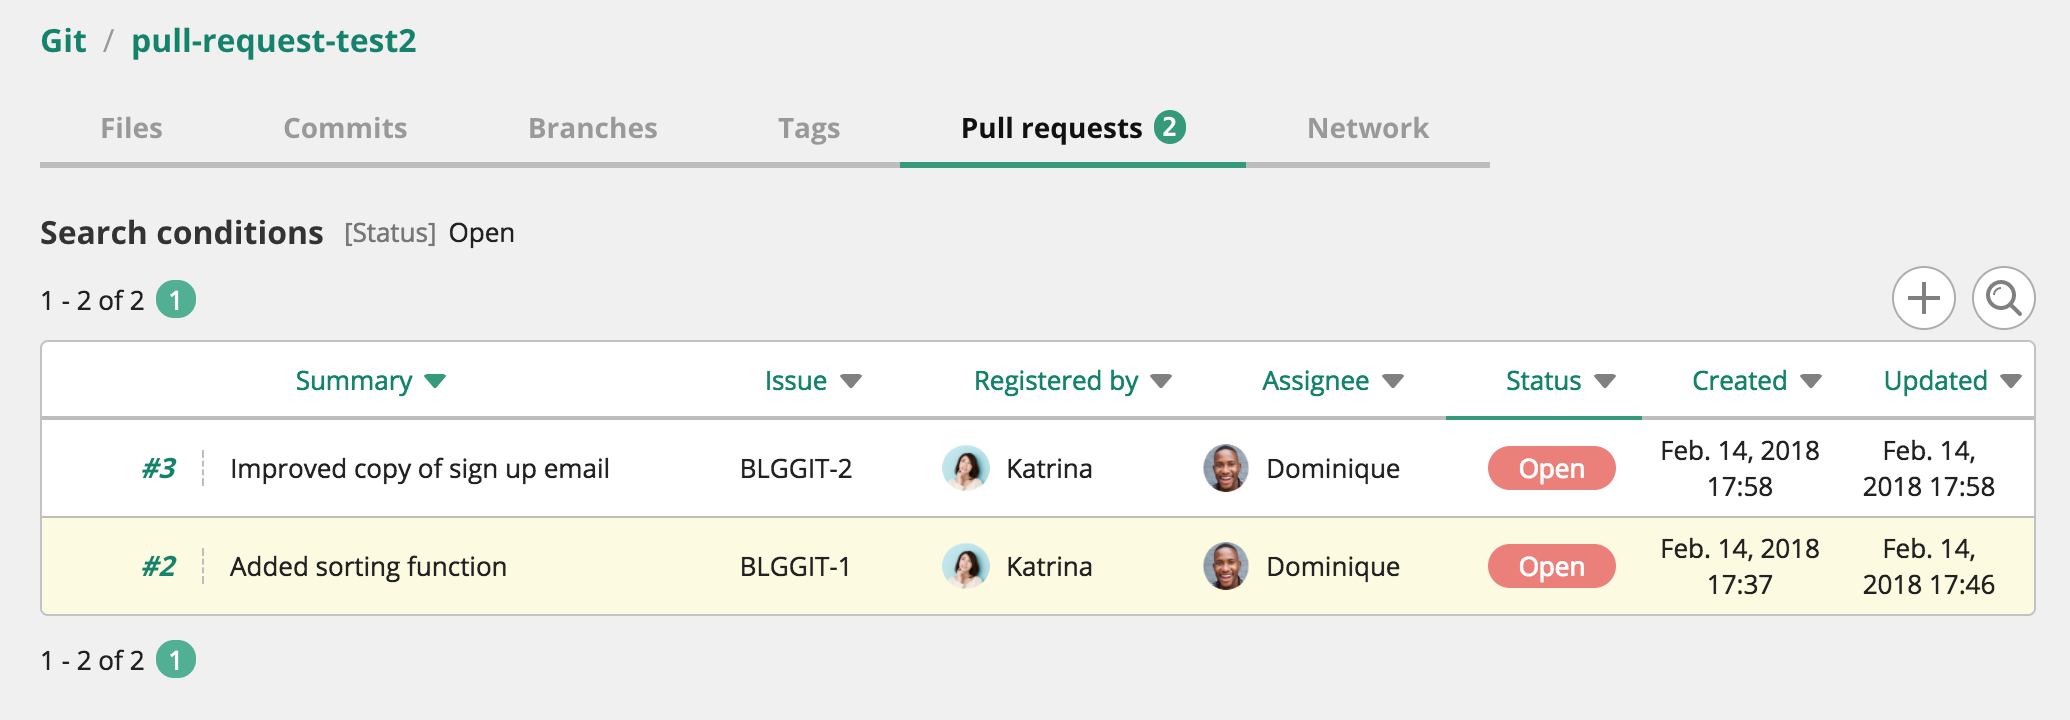 Pull request list in Backlog, a Git hosting service with bug tracking
  features.